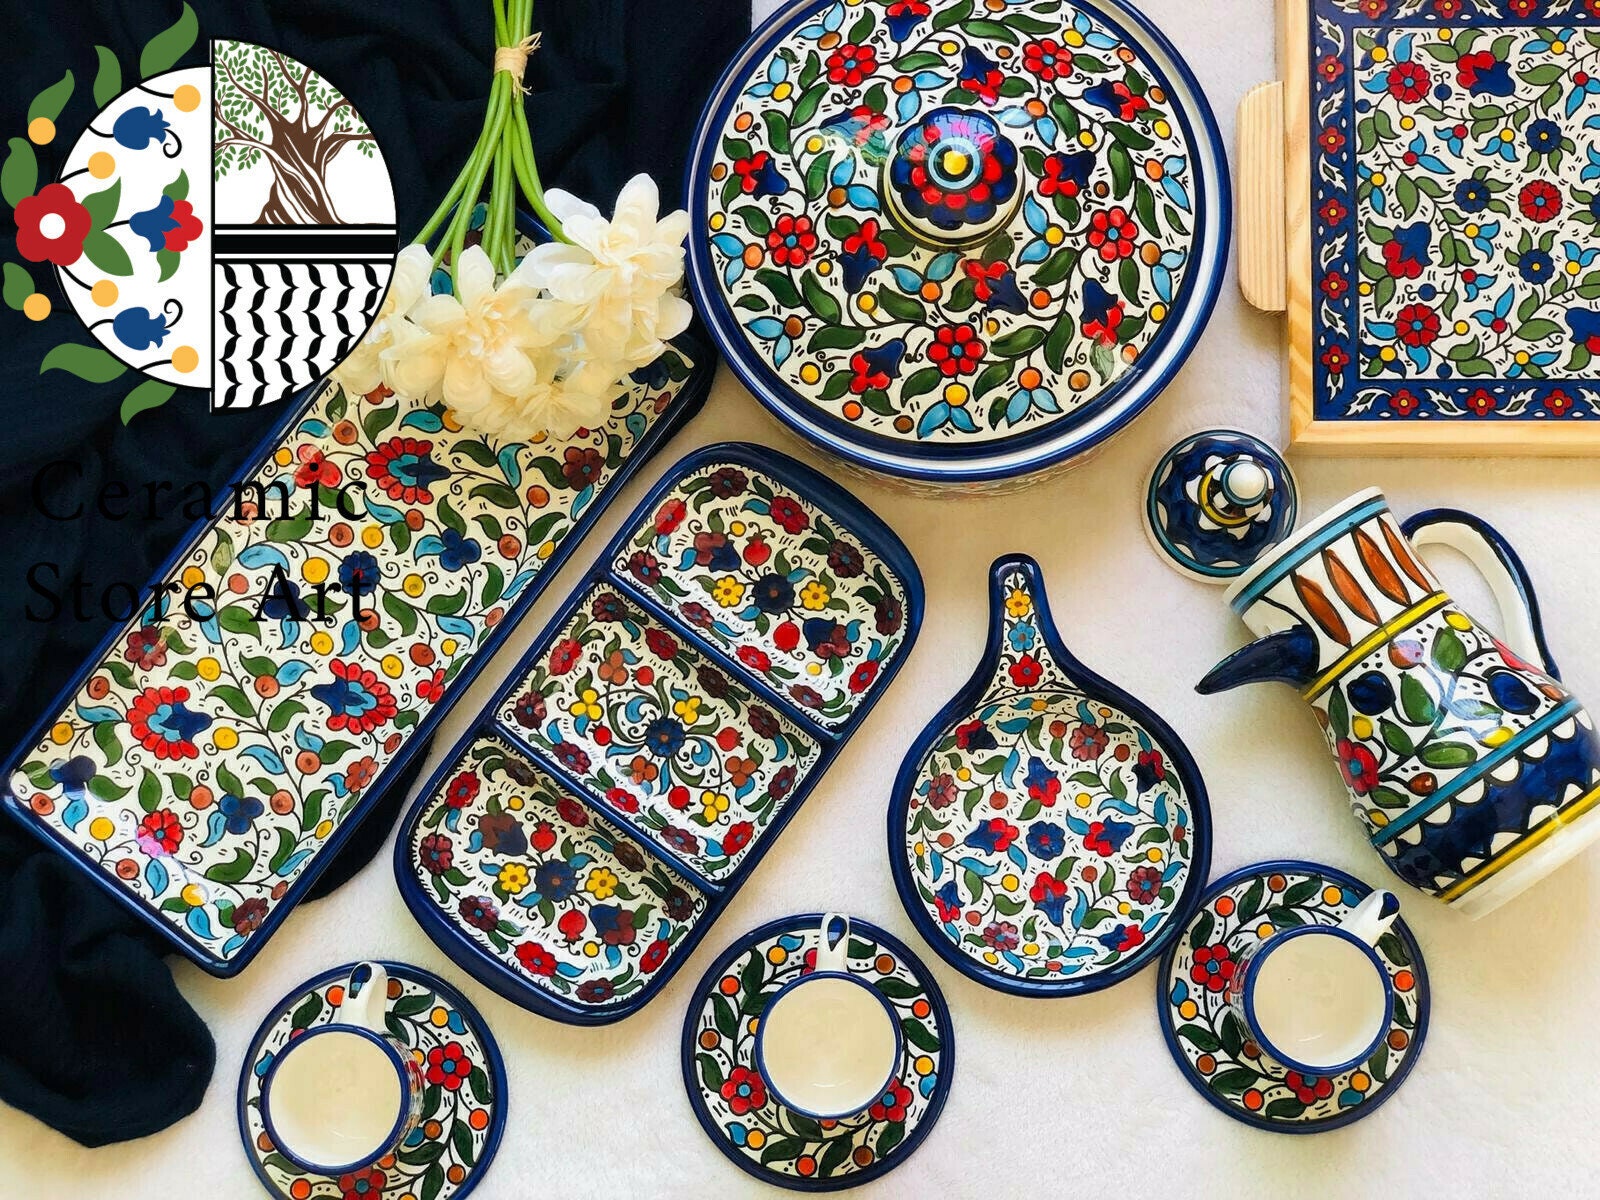 Ceramic Bowl 10cm Handmade Handpainted High Quality Ceramic Palestinian Product Hebron Ceramic Multi Colored Floral Blue and white